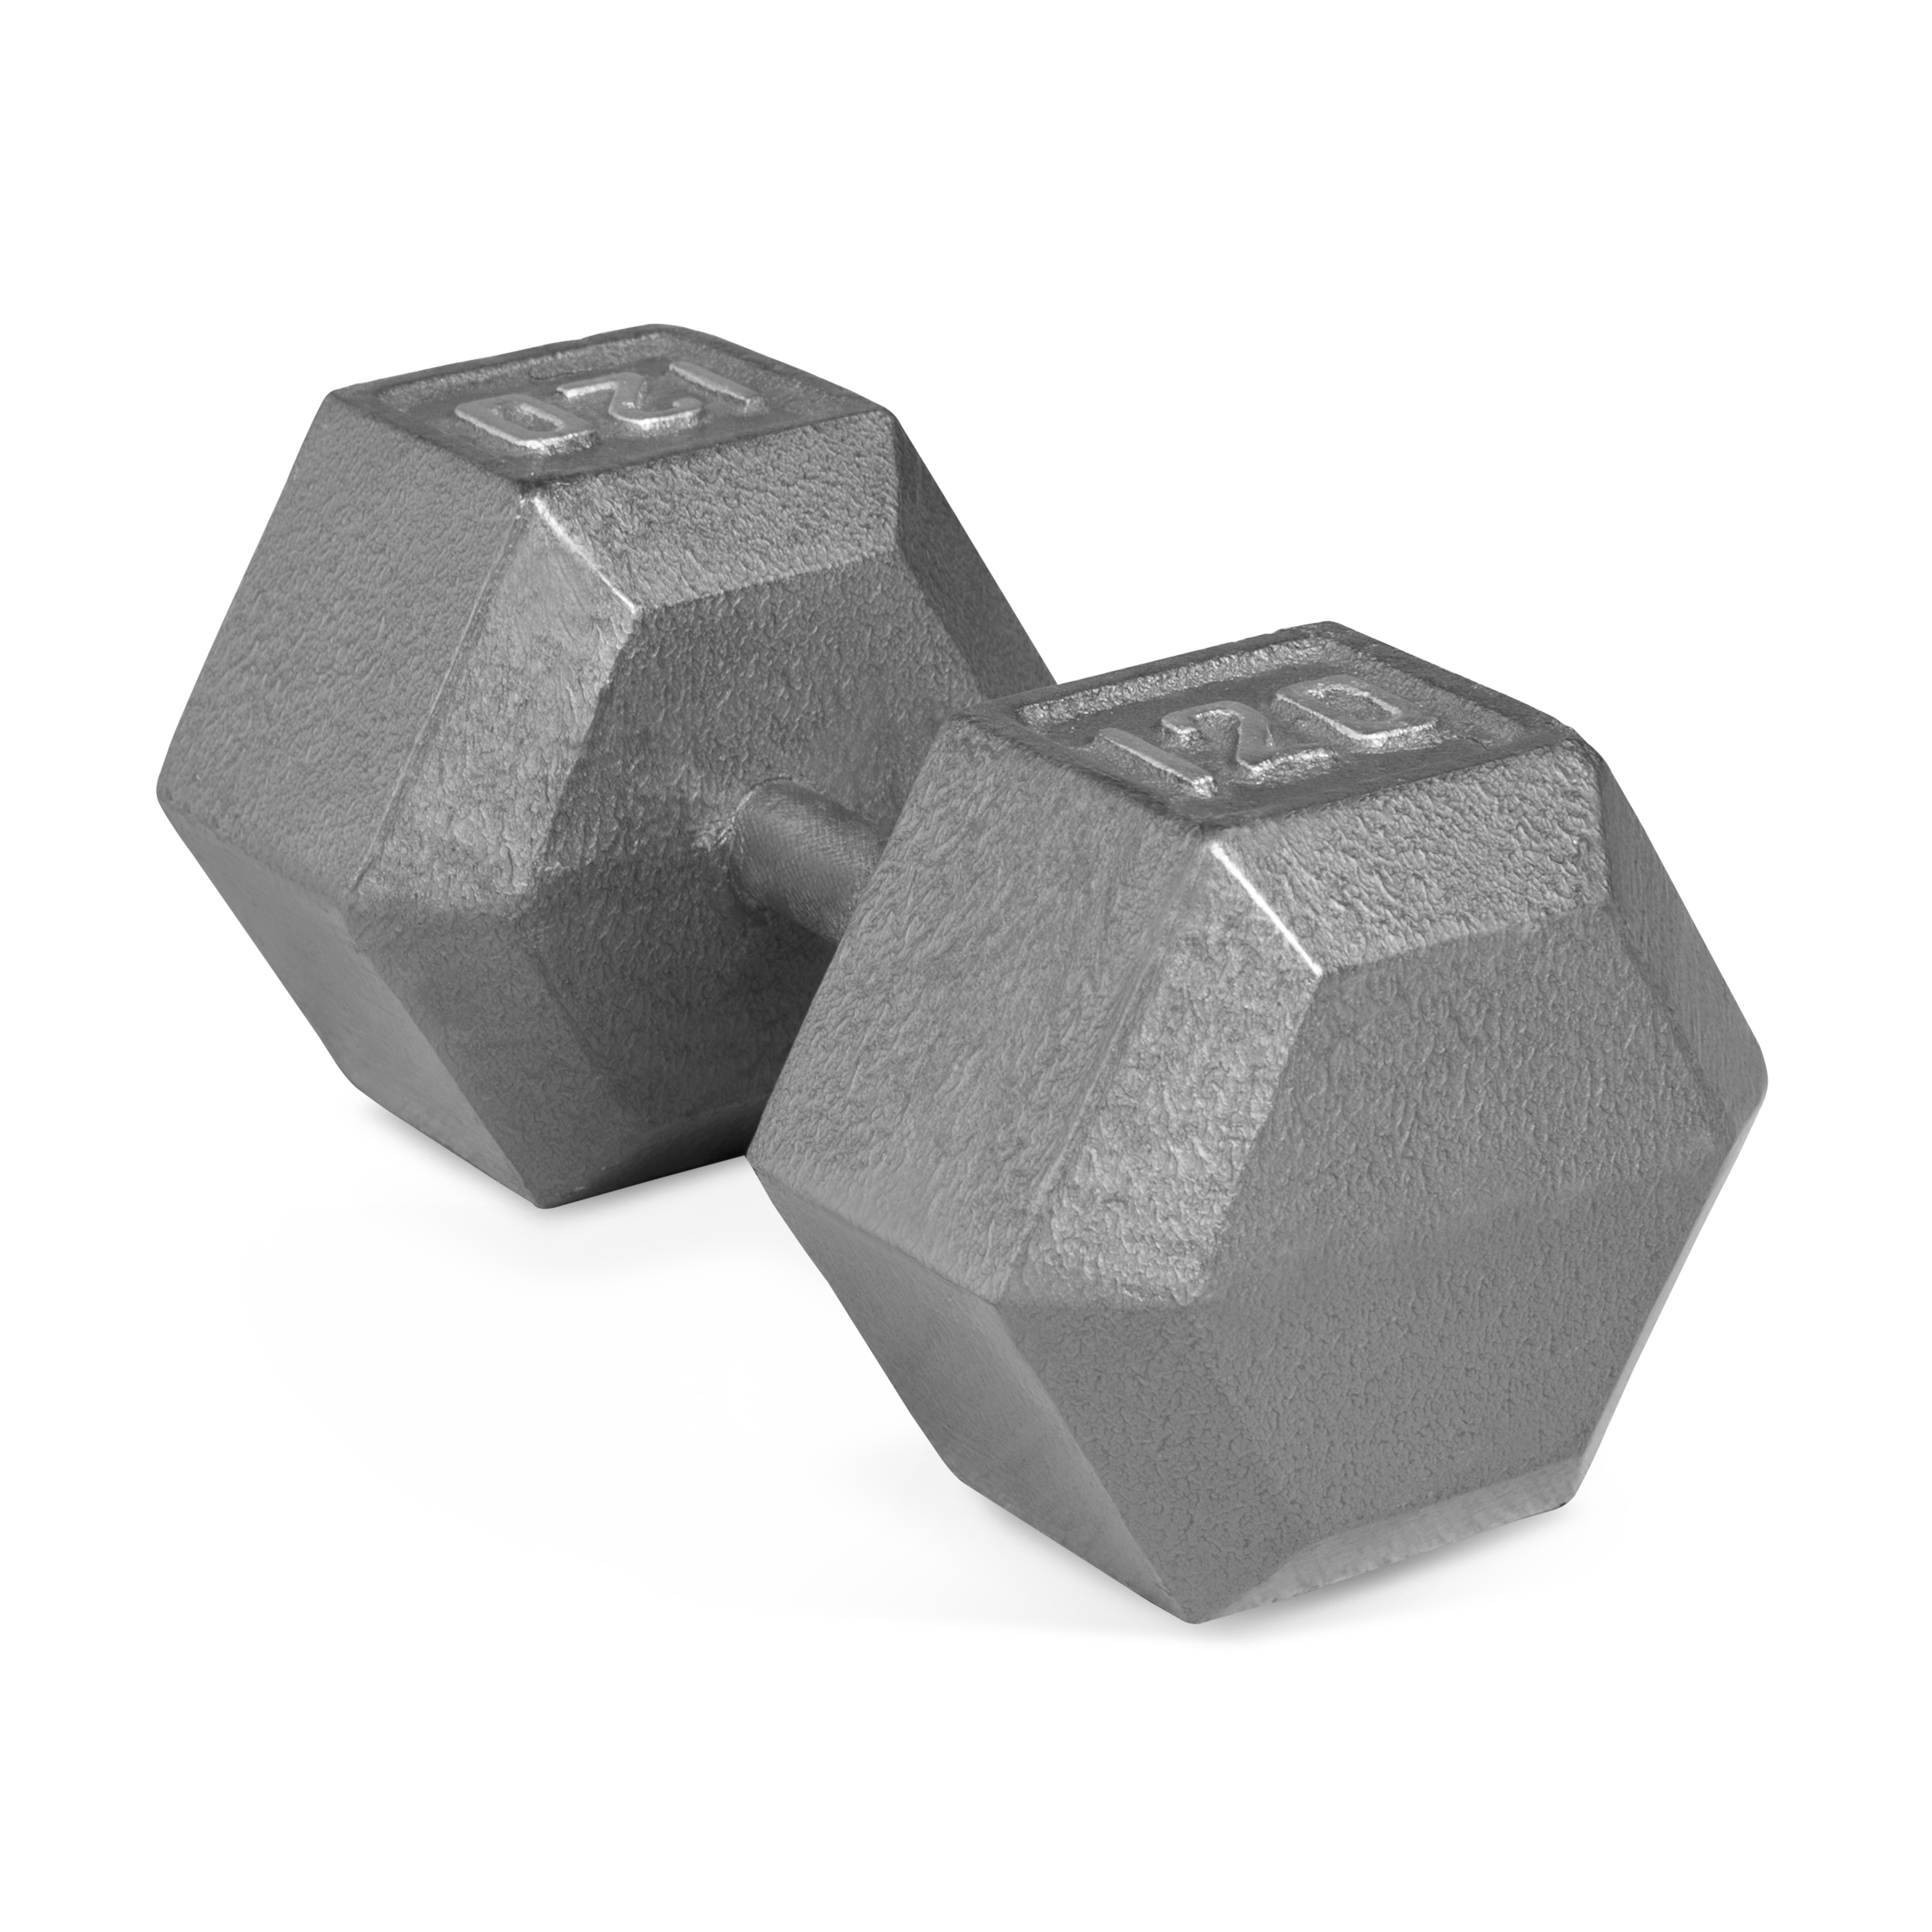 CAP Barbell 120lb Cast Iron Hex Dumbbell, Single - image 1 of 6